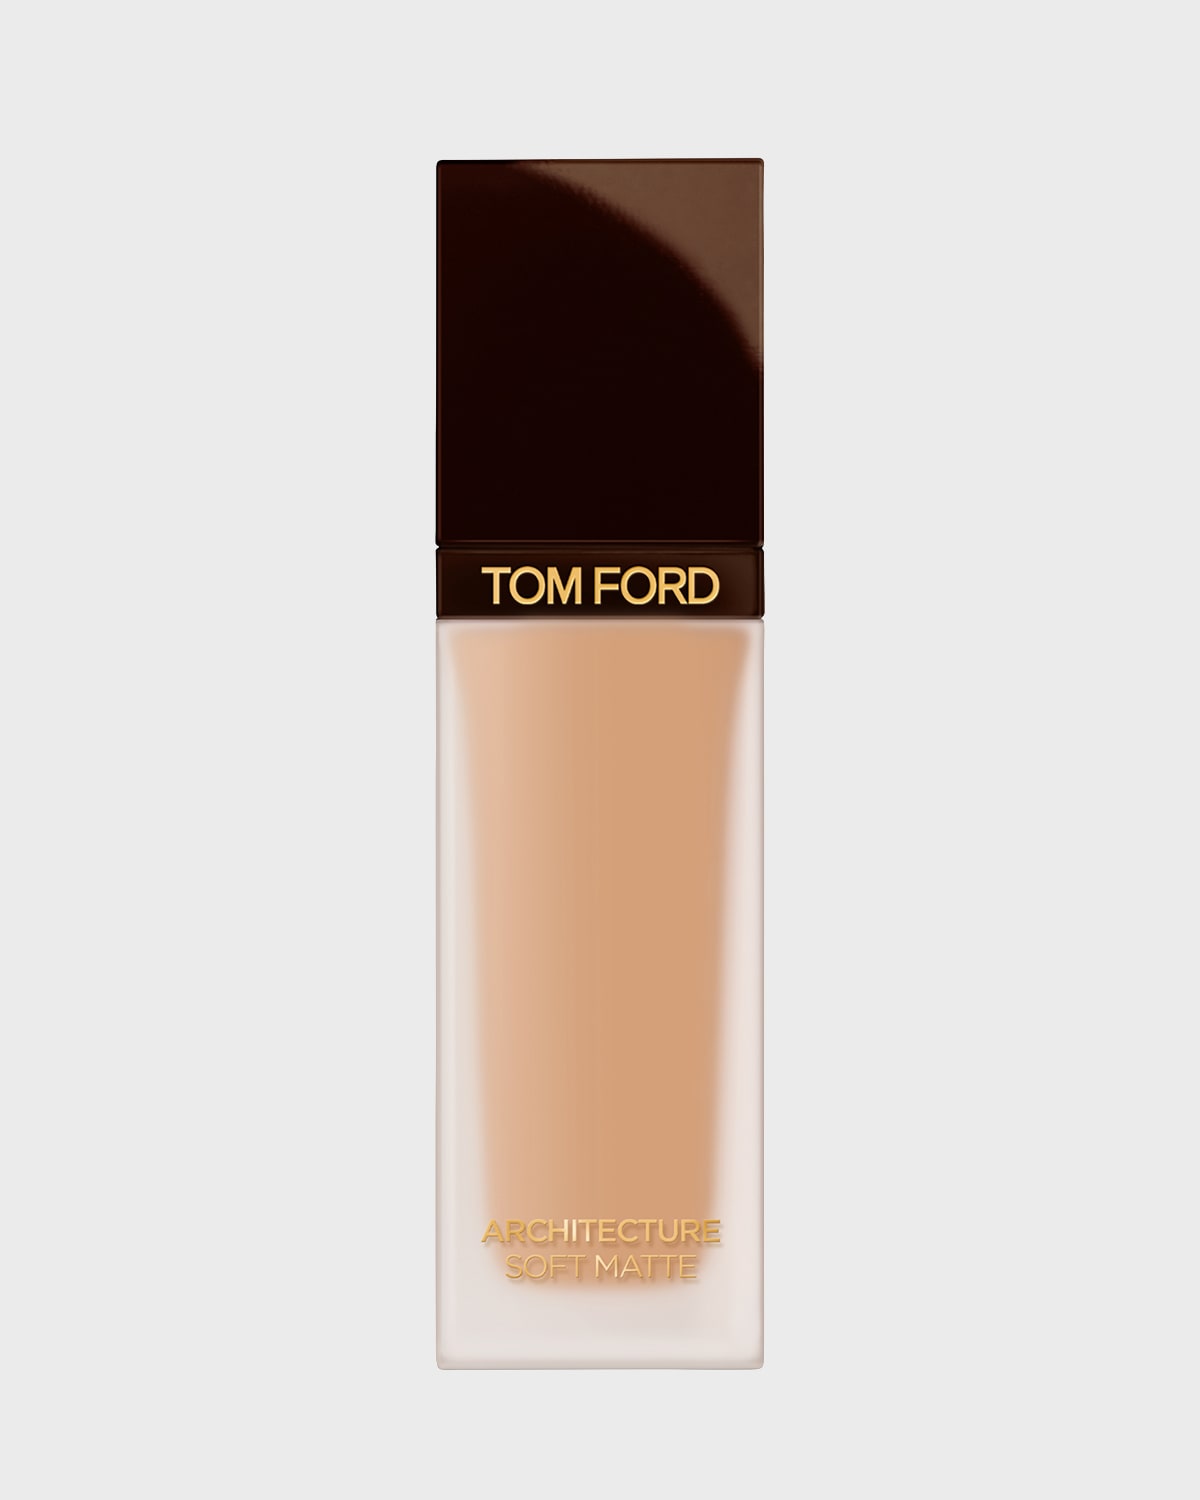 Shop Tom Ford Architecture Soft Matte Foundation In Asm - 6 Natural